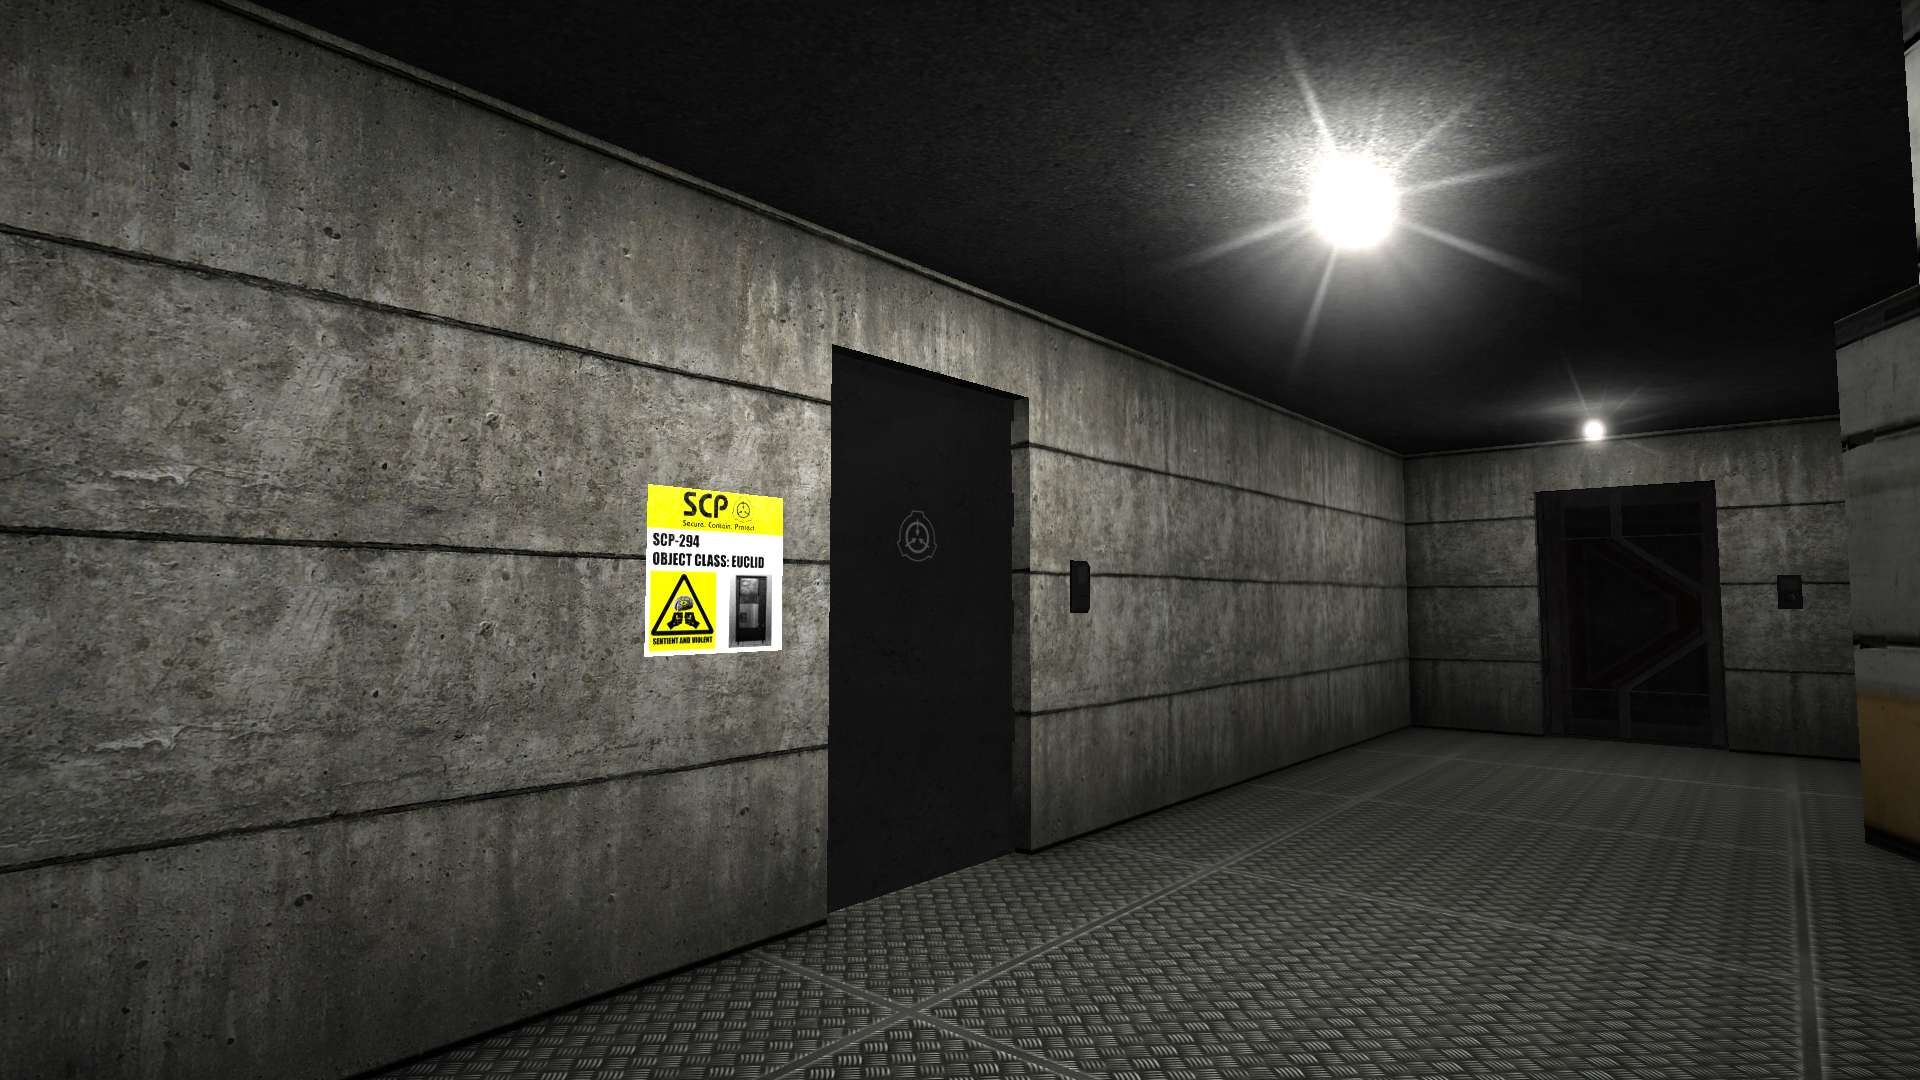 Image 4 - Eternal Nightmares Revival mod for SCP - Containment Breach  Multiplayer Mod - Mod DB